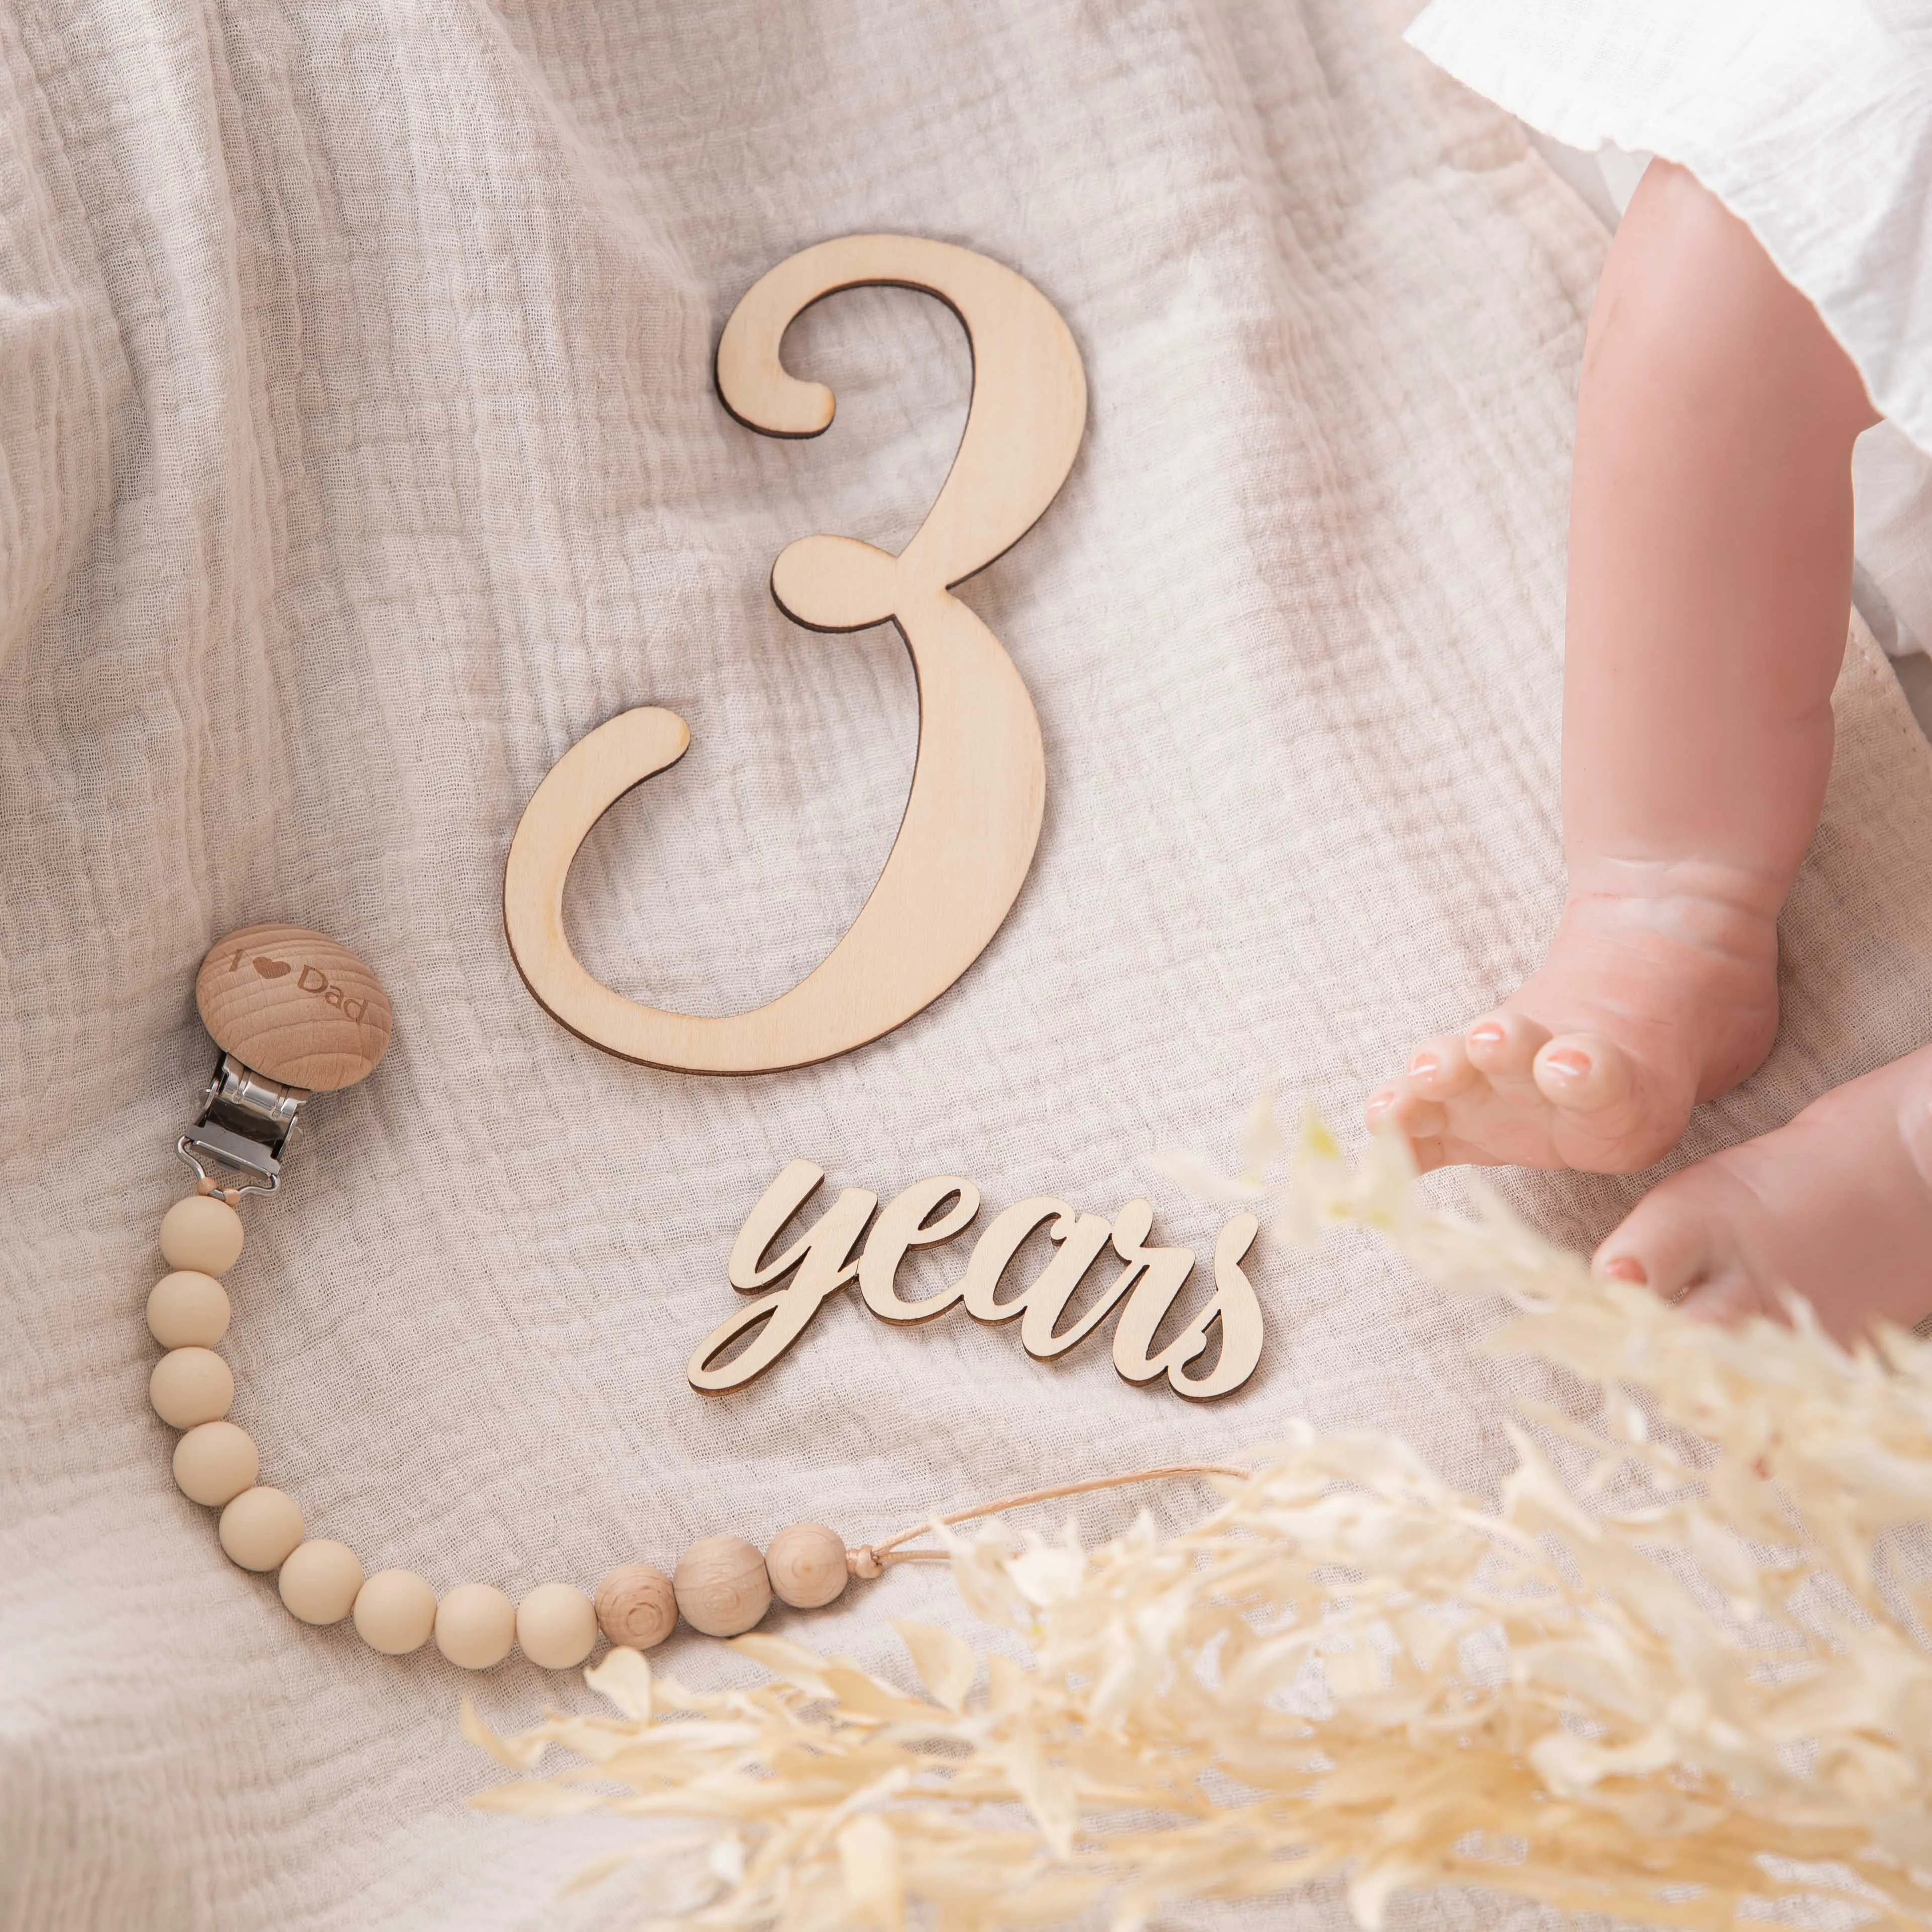 19pcs/lot Baby Milestone Number Monthly Memorial Cards Newborn Baby Wooden Engraved Age Photography Accessories Birthing Gift